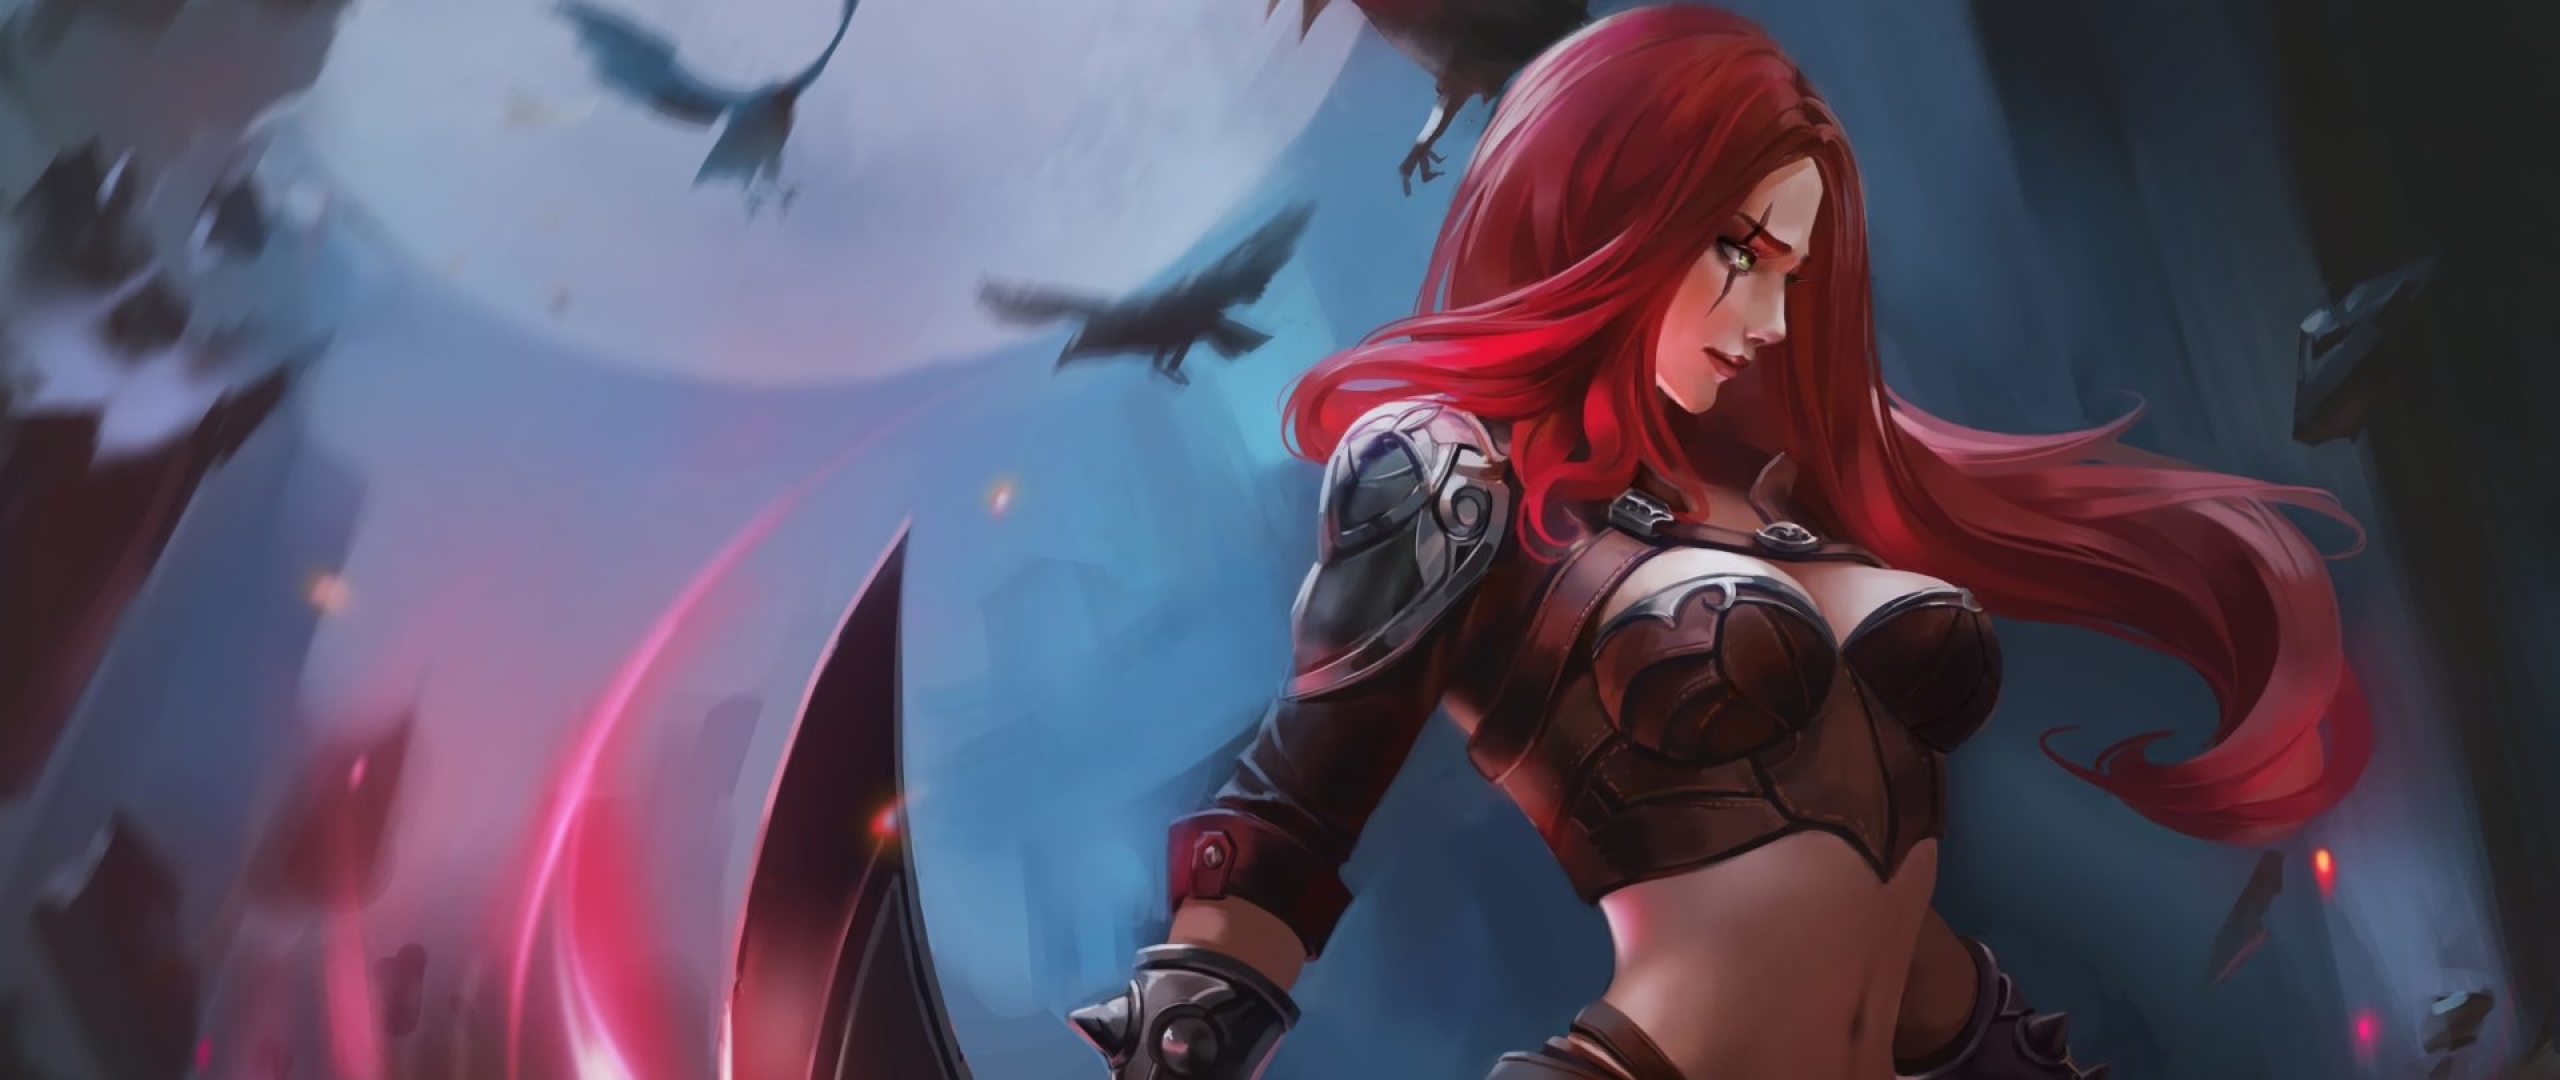 2560x1080 Katarina In League Of Legends 2560x1080 Resolution Wallpaper Hd Games 4k Wallpapers Images Photos And Background